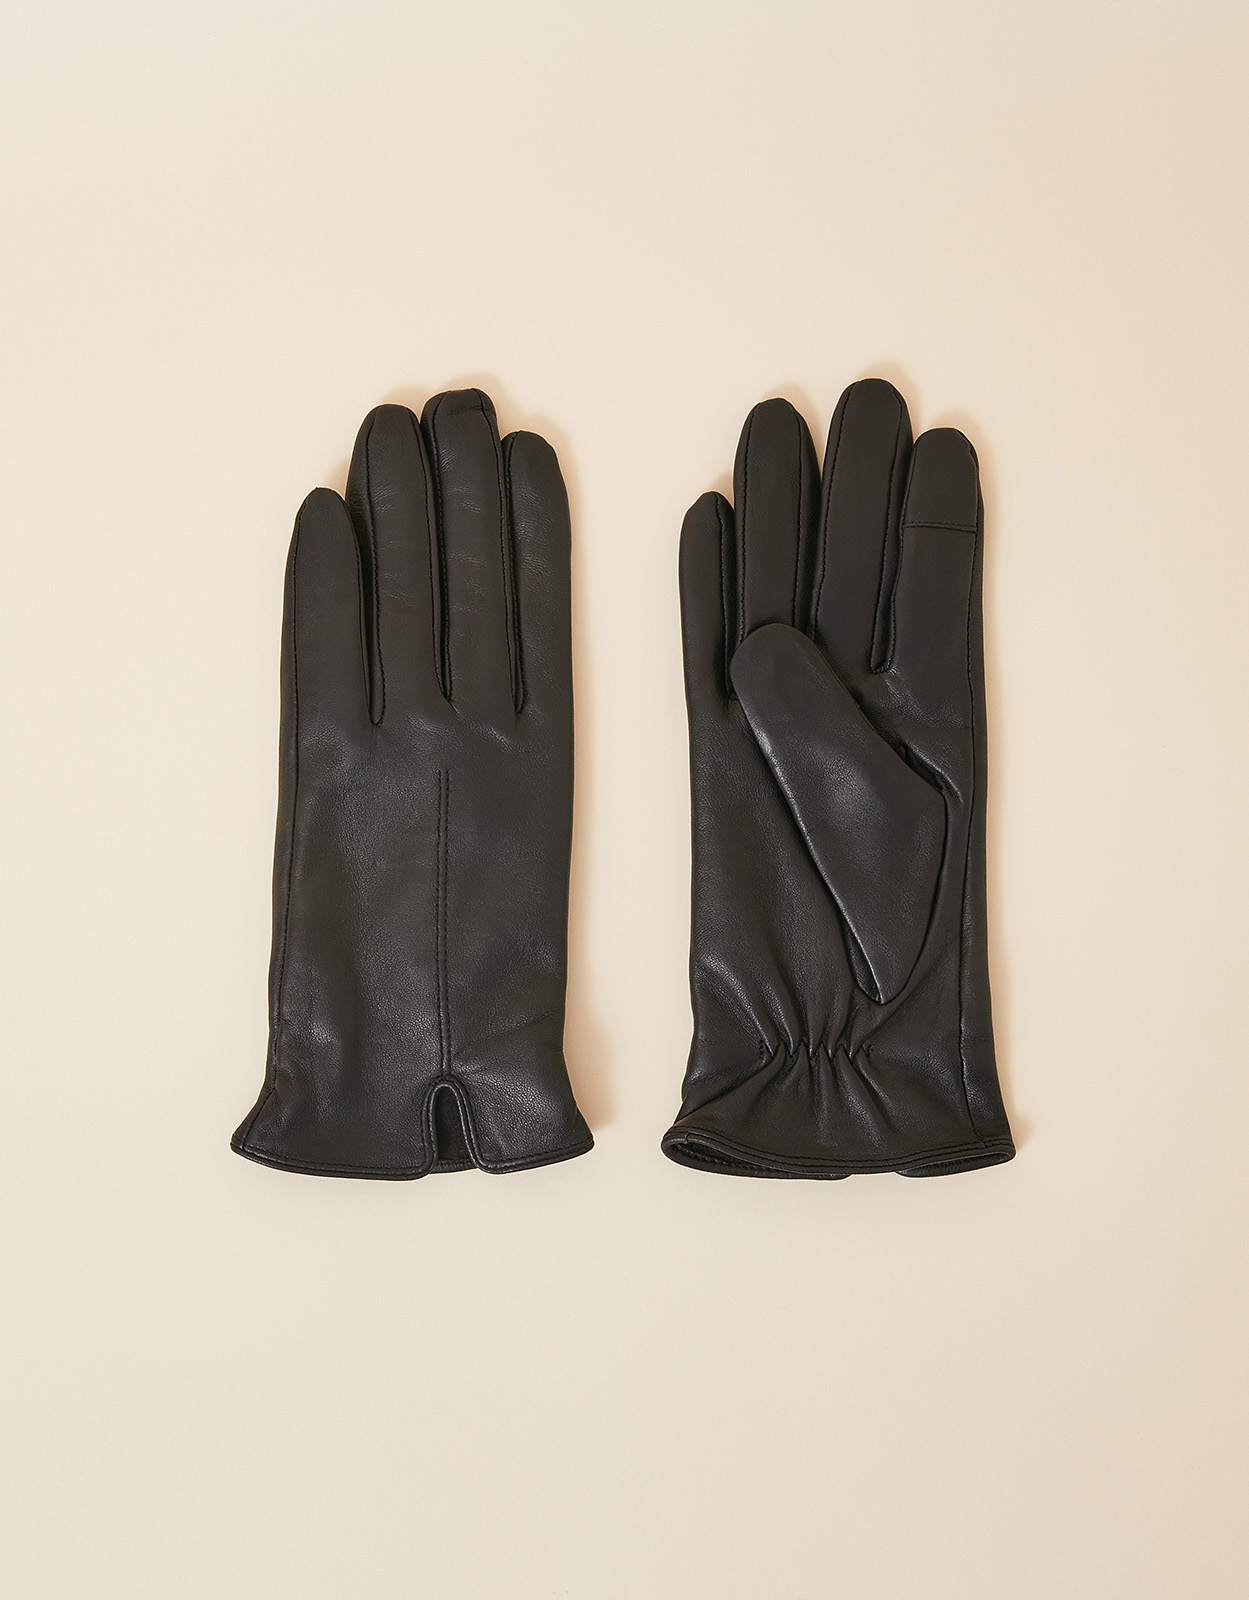 Accessorize Touchscreen Leather Gloves Black, Size: S / M